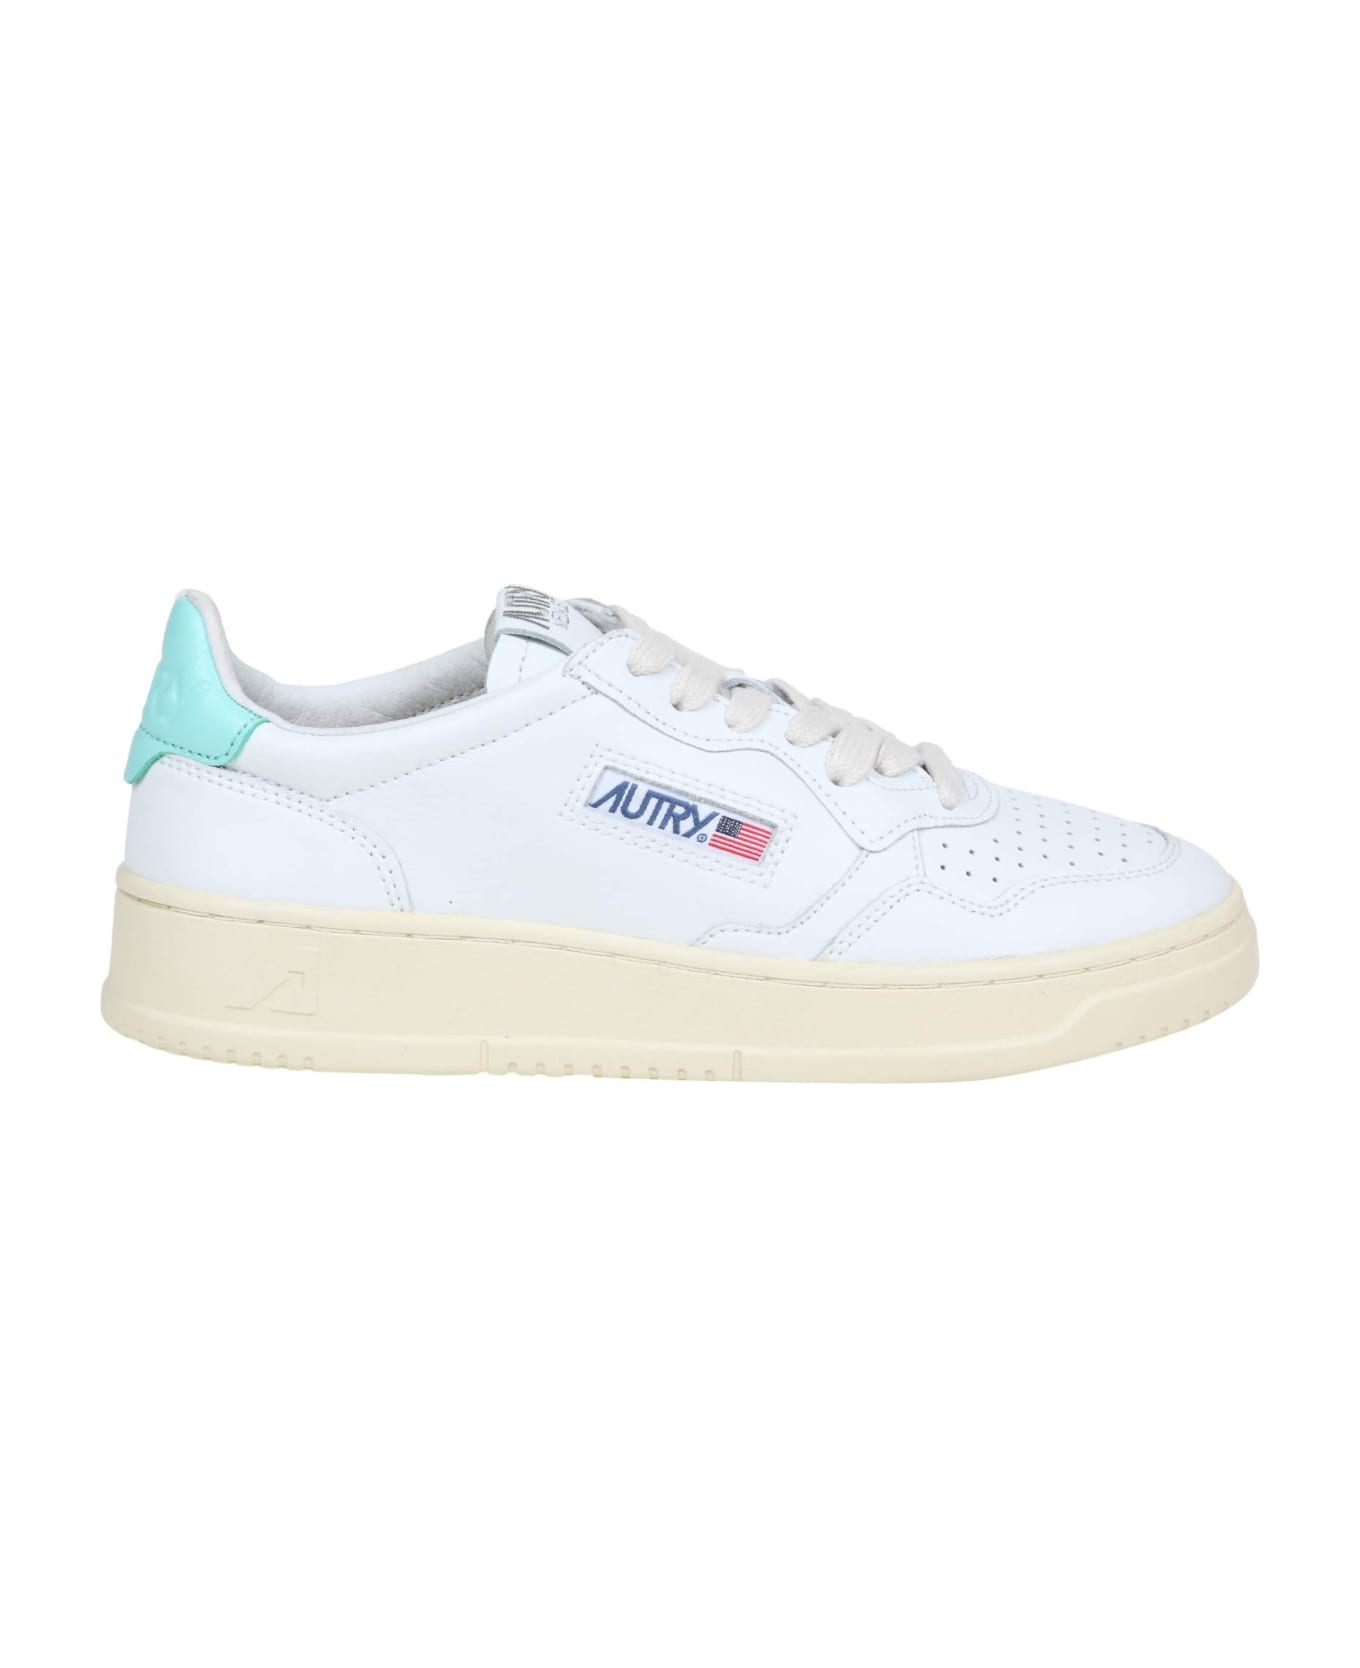 Autry 01 Sneakers In White Leather - white/turquoise